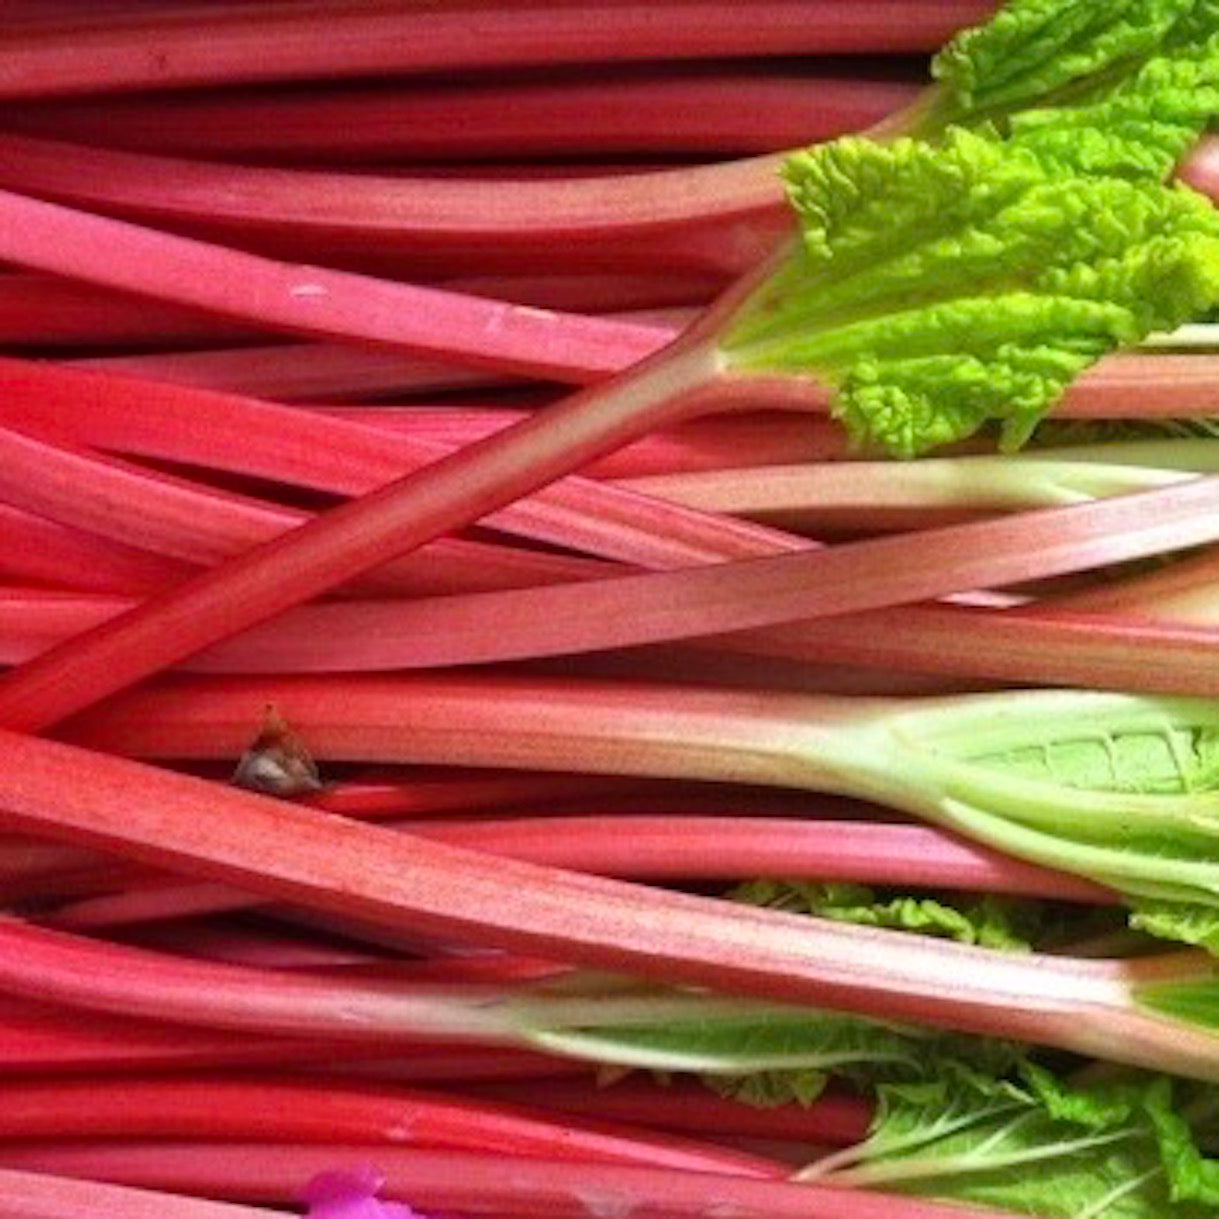 Shop Rhubarb in Singapore - The New Grocer